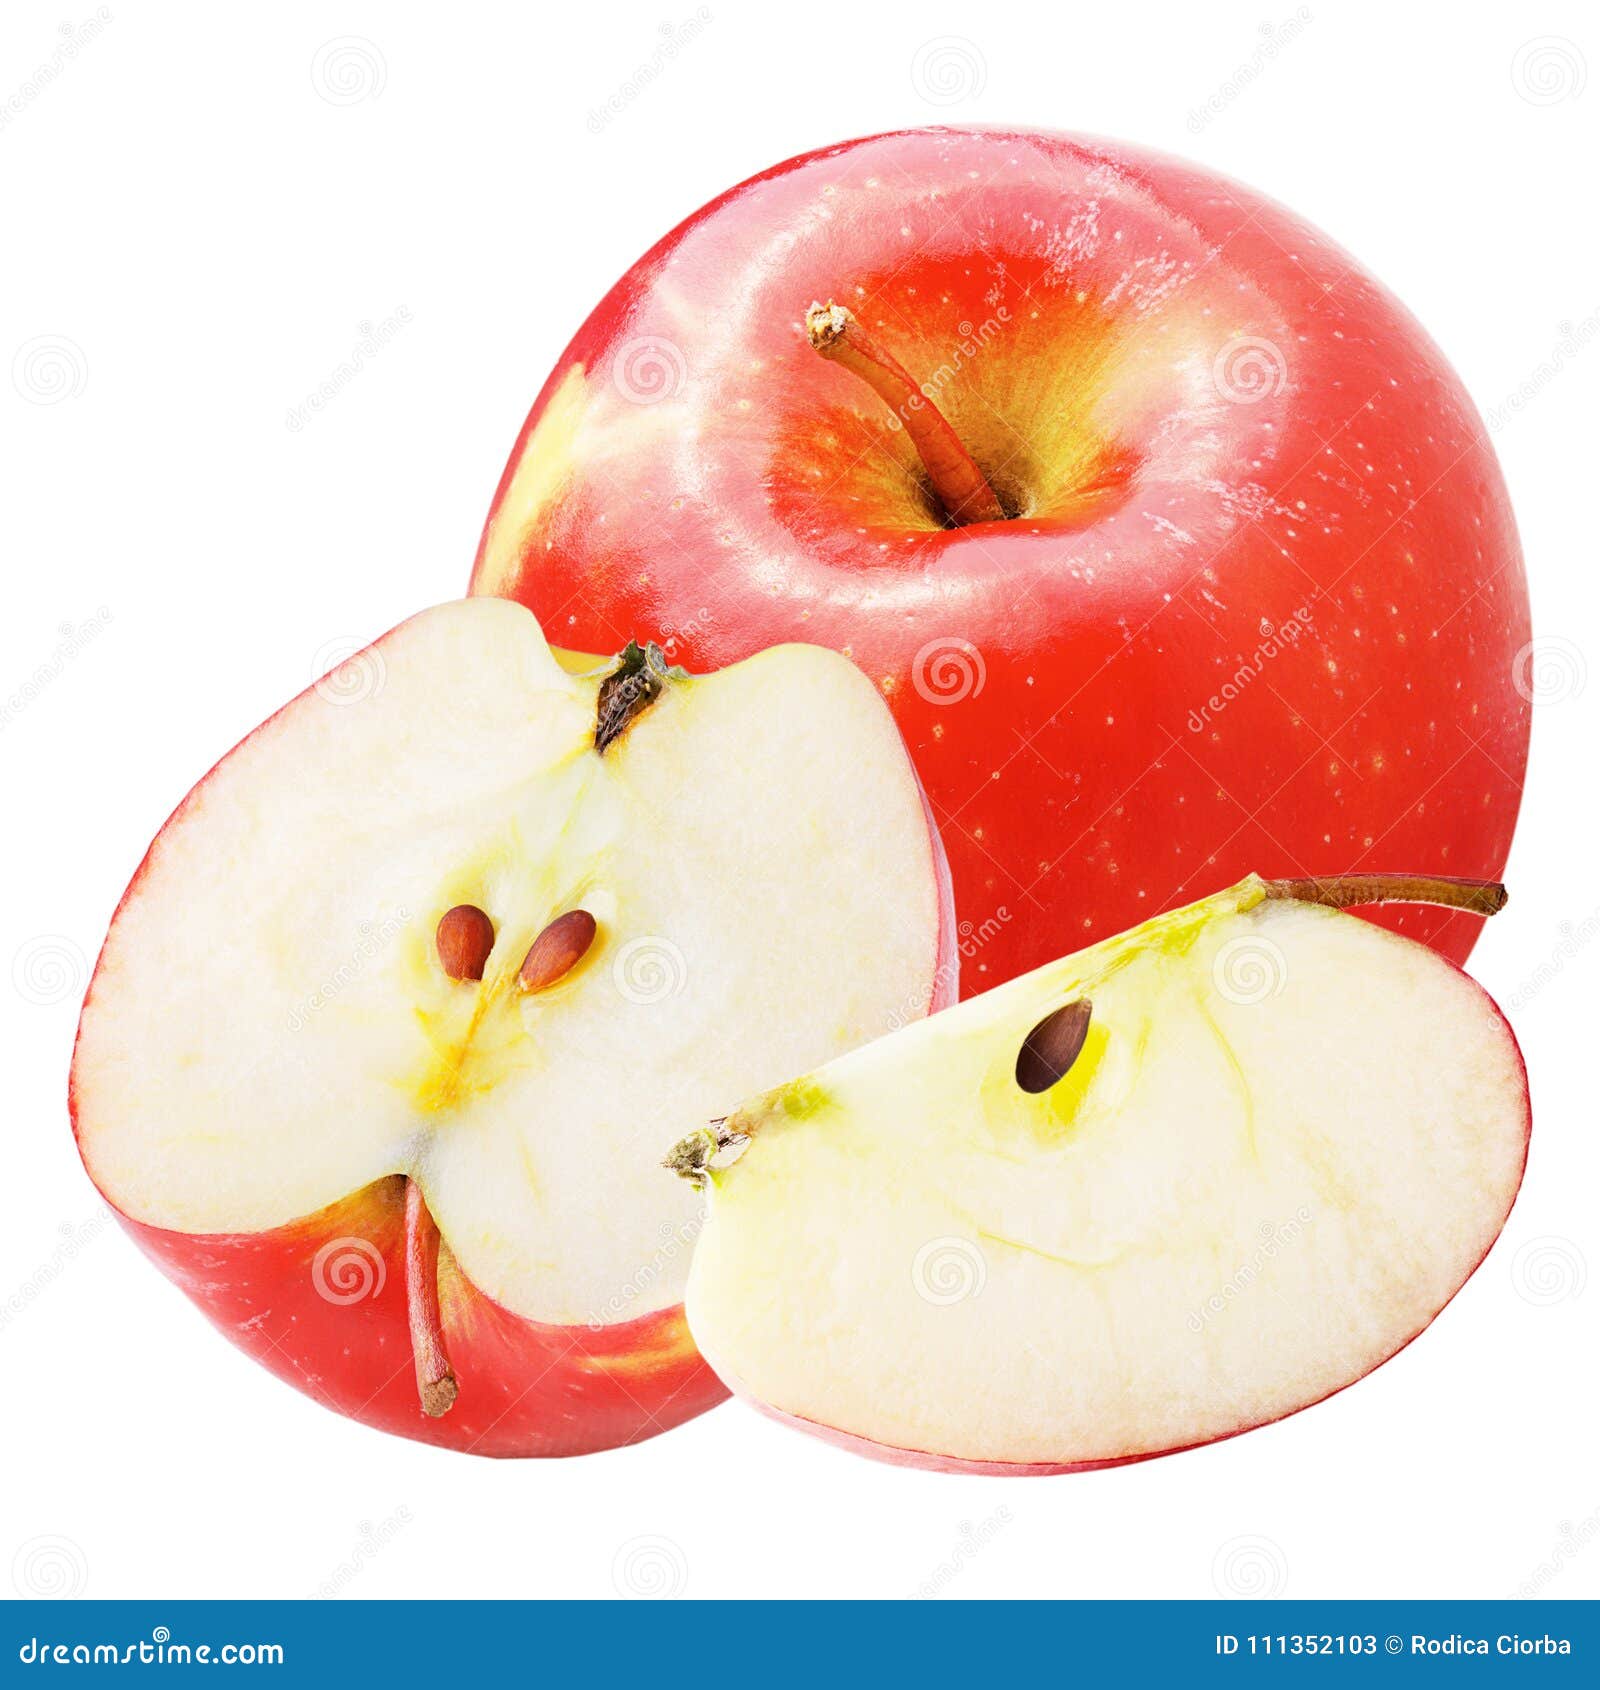 https://thumbs.dreamstime.com/z/isolated-apples-whole-slices-apple-white-background-clipping-path-as-package-design-element-111352103.jpg